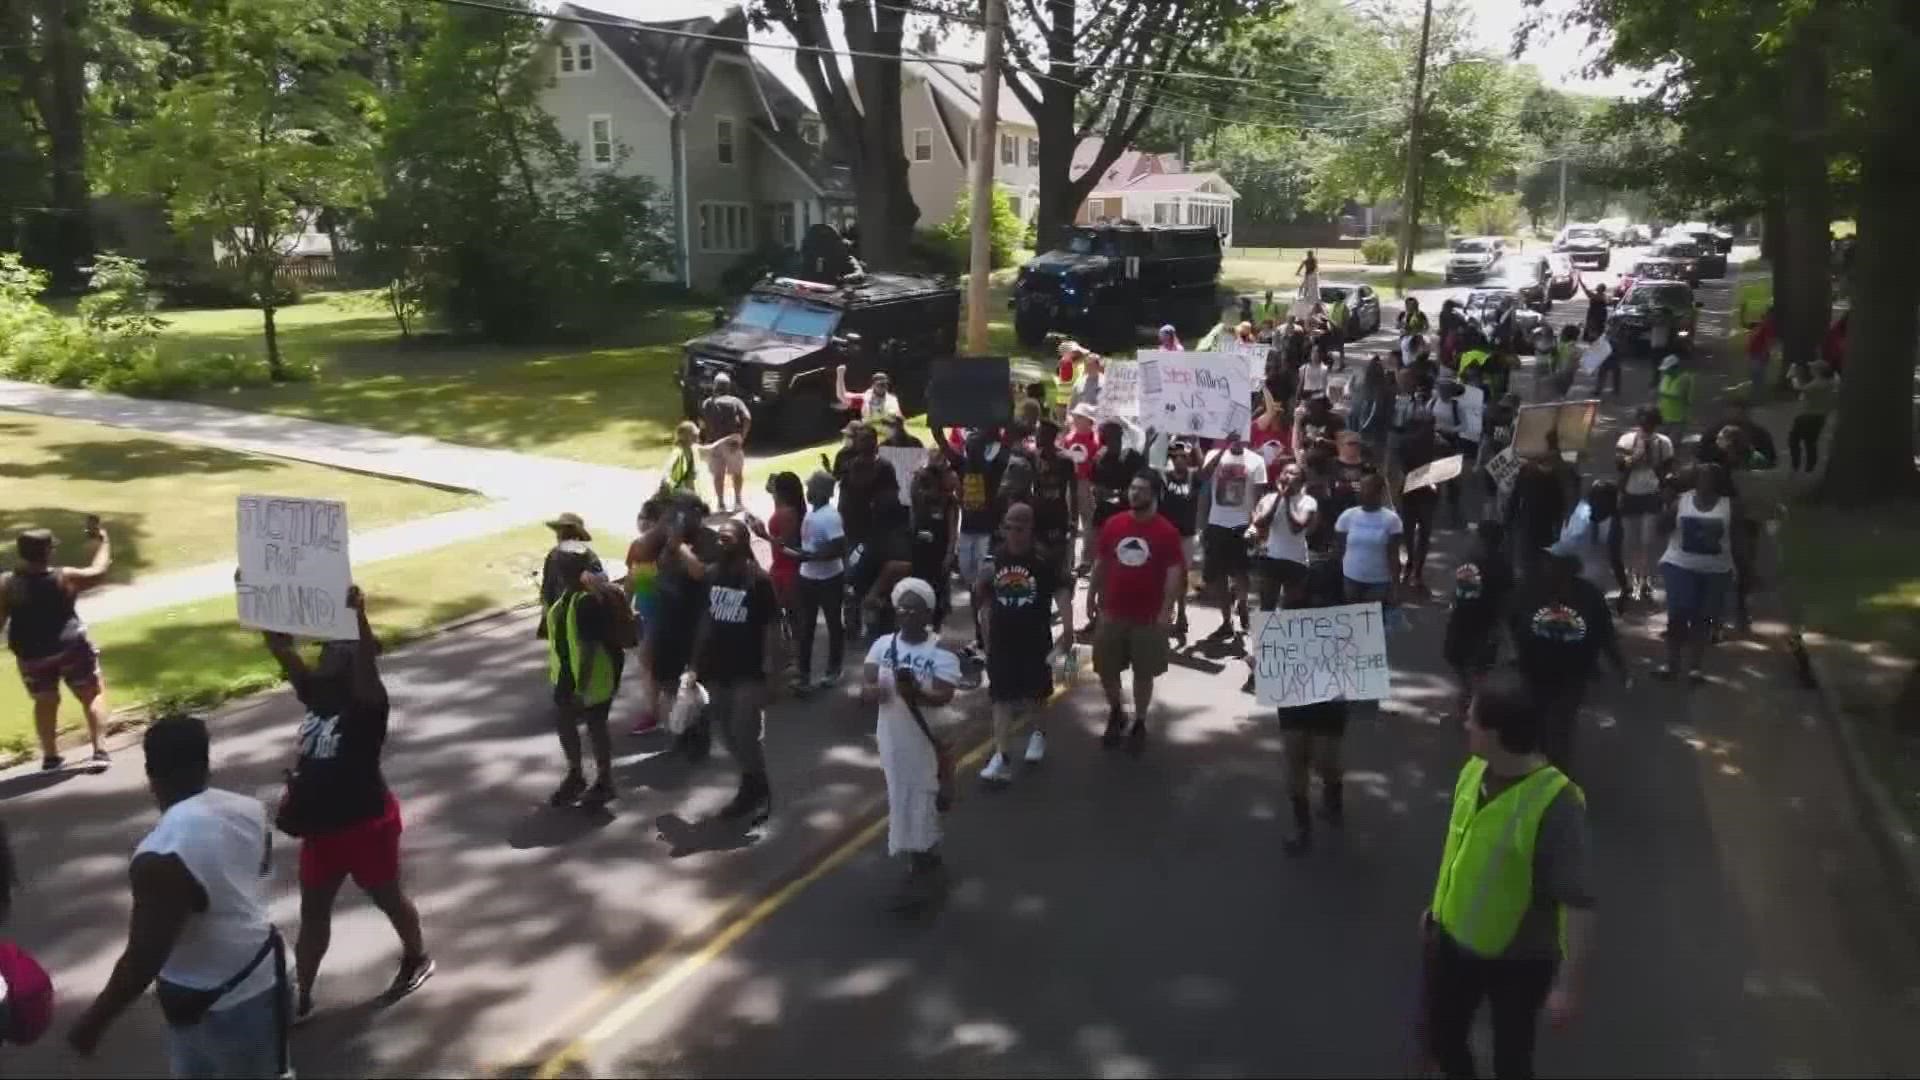 Some of the protesters even made their way to Mayor Dan Horrigan's home.